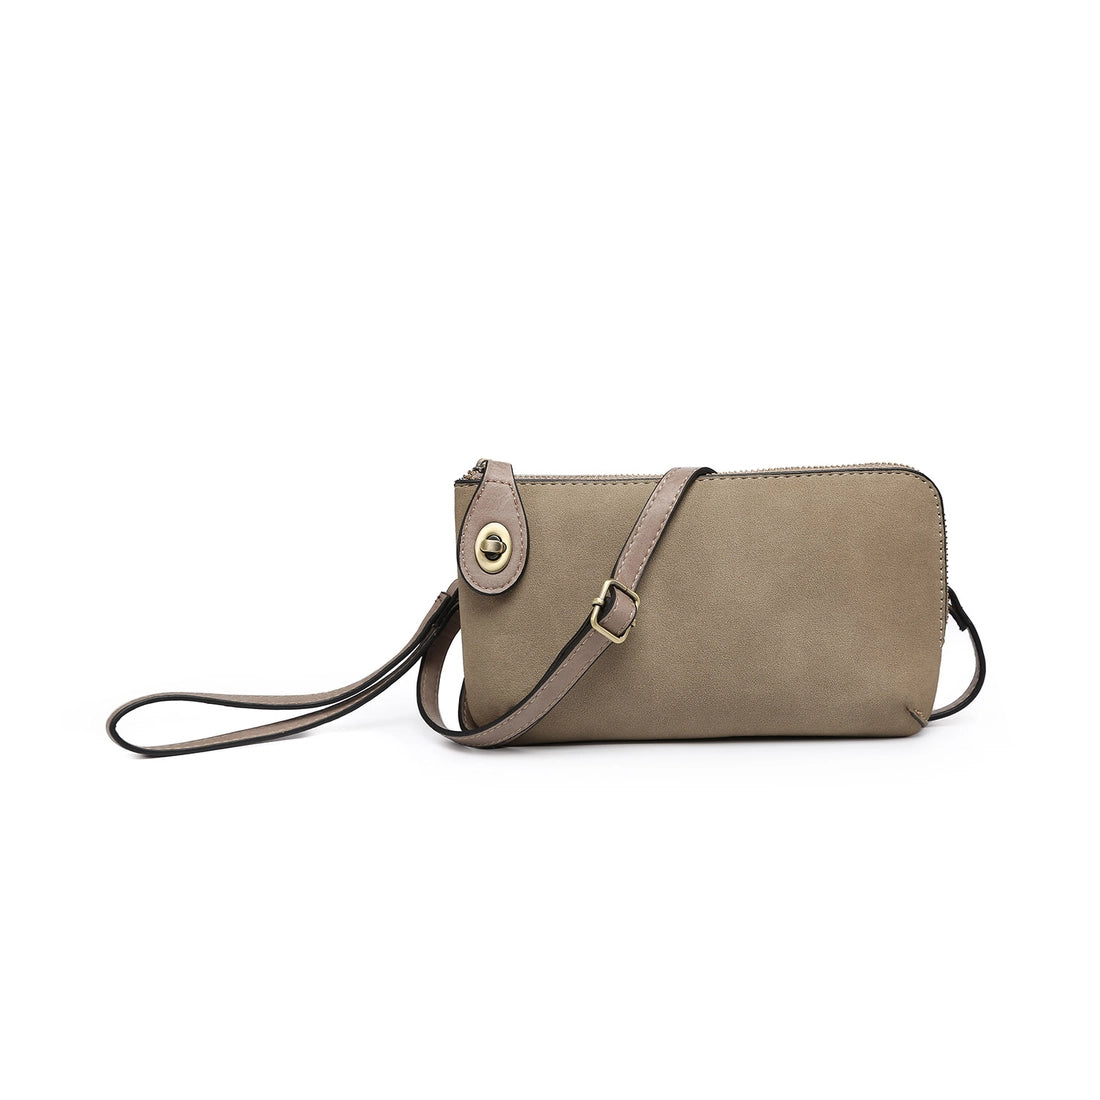 Jen & Co Kendall Suede Vegan Leather Crossbody, Grey-Taupe